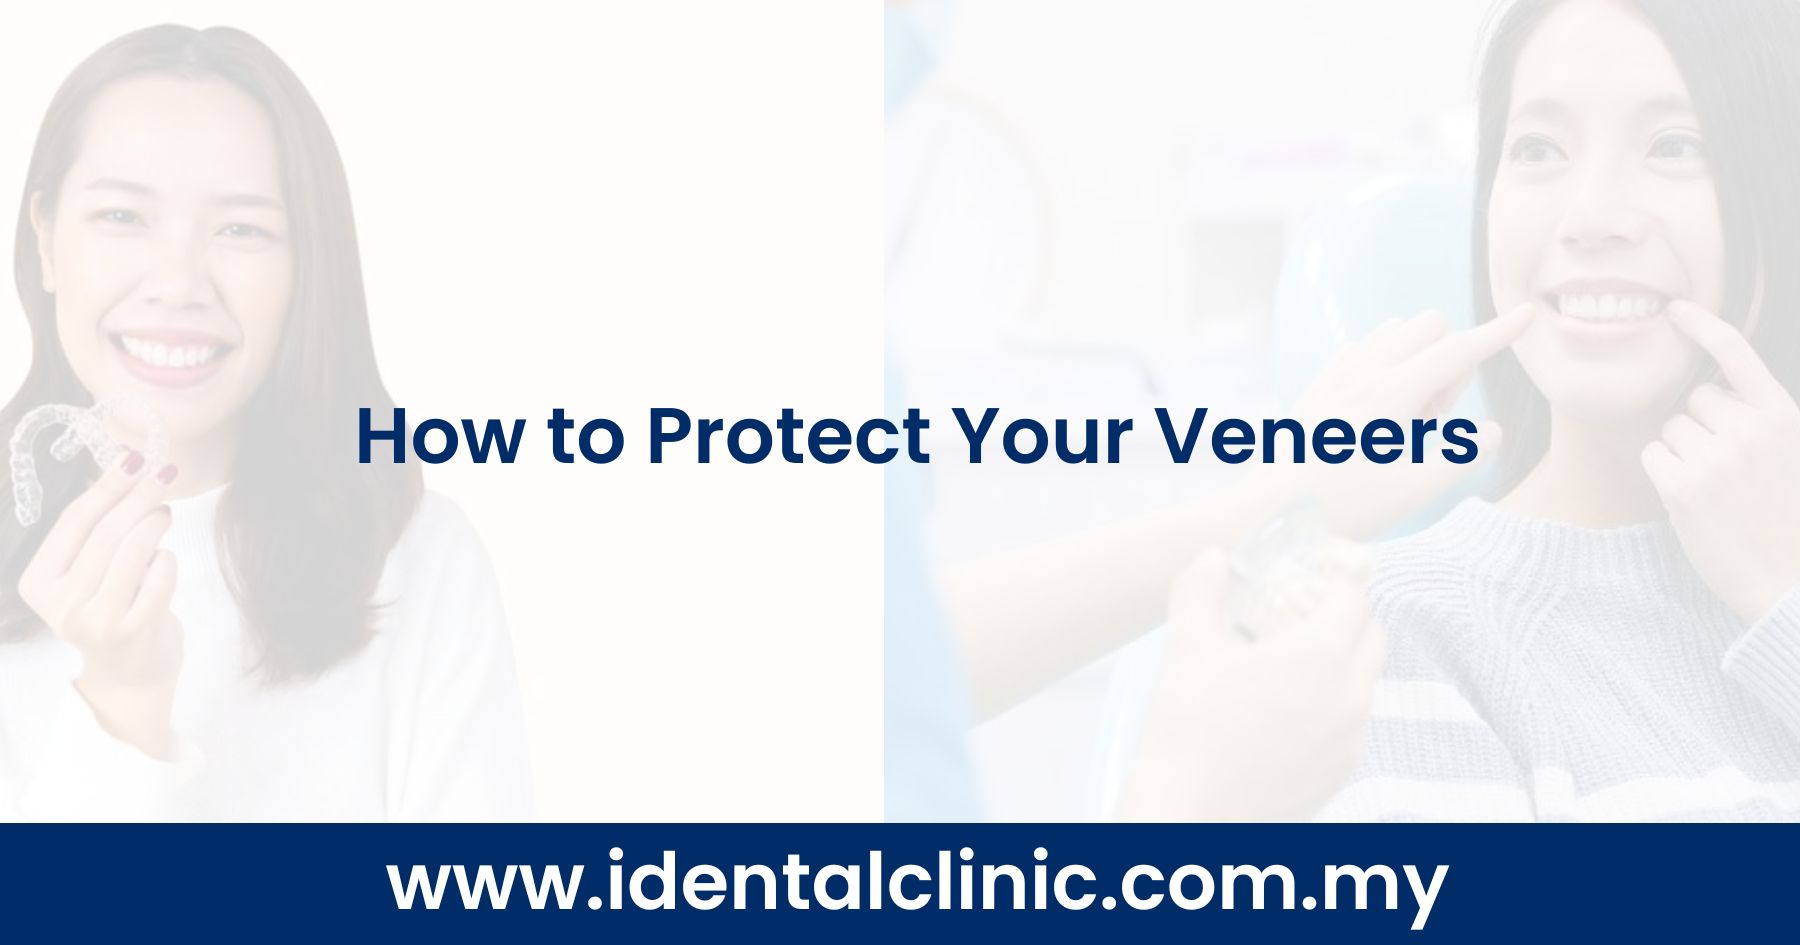 How to Protect Your Veneers